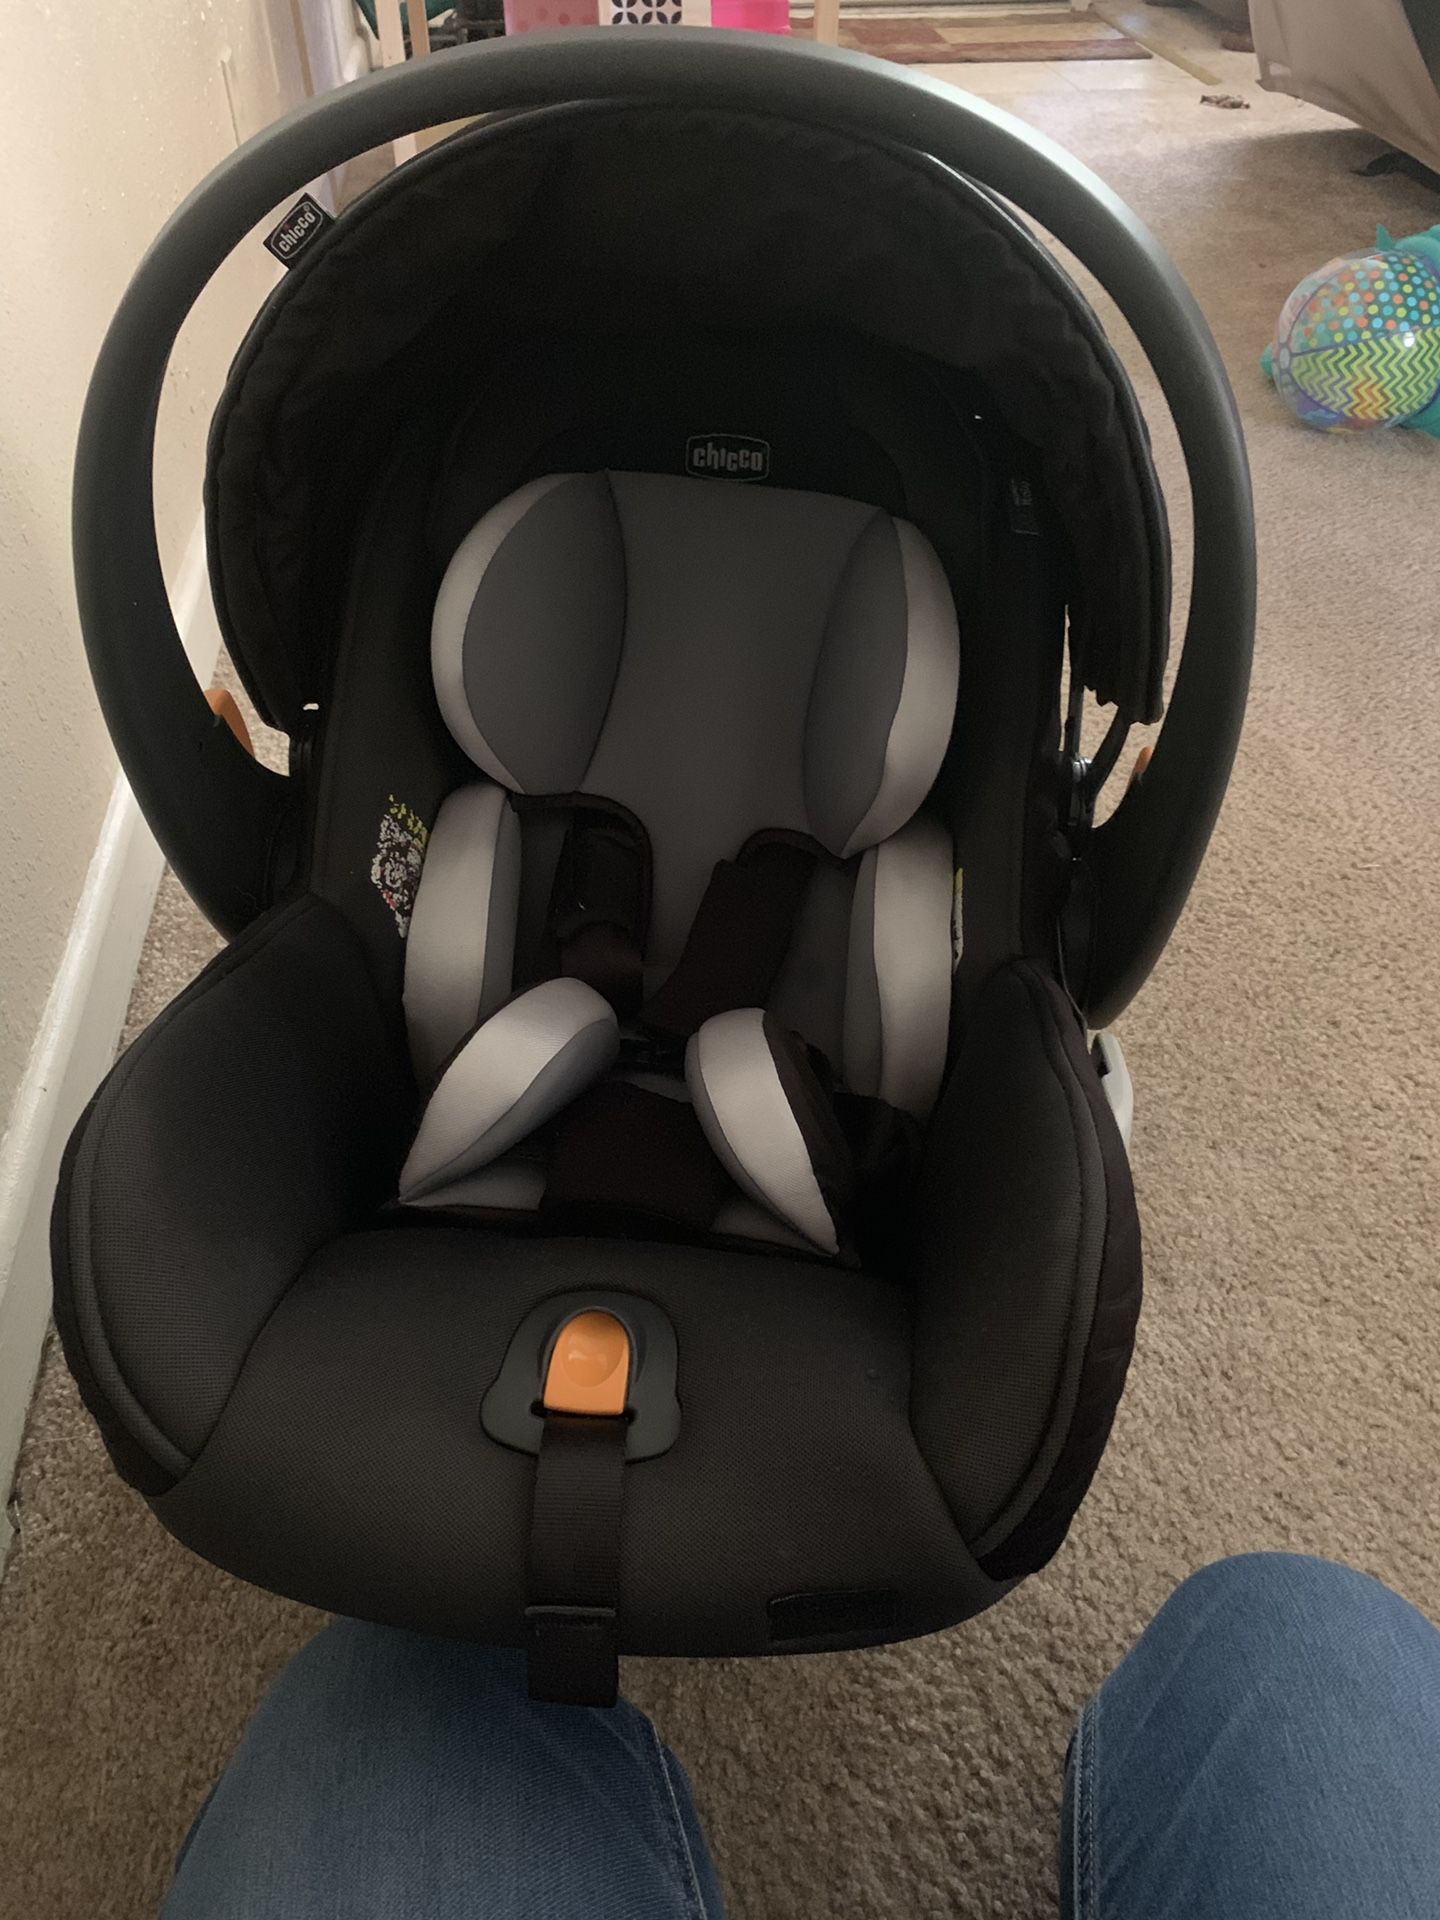 Chicco KeyFit Infant car seat